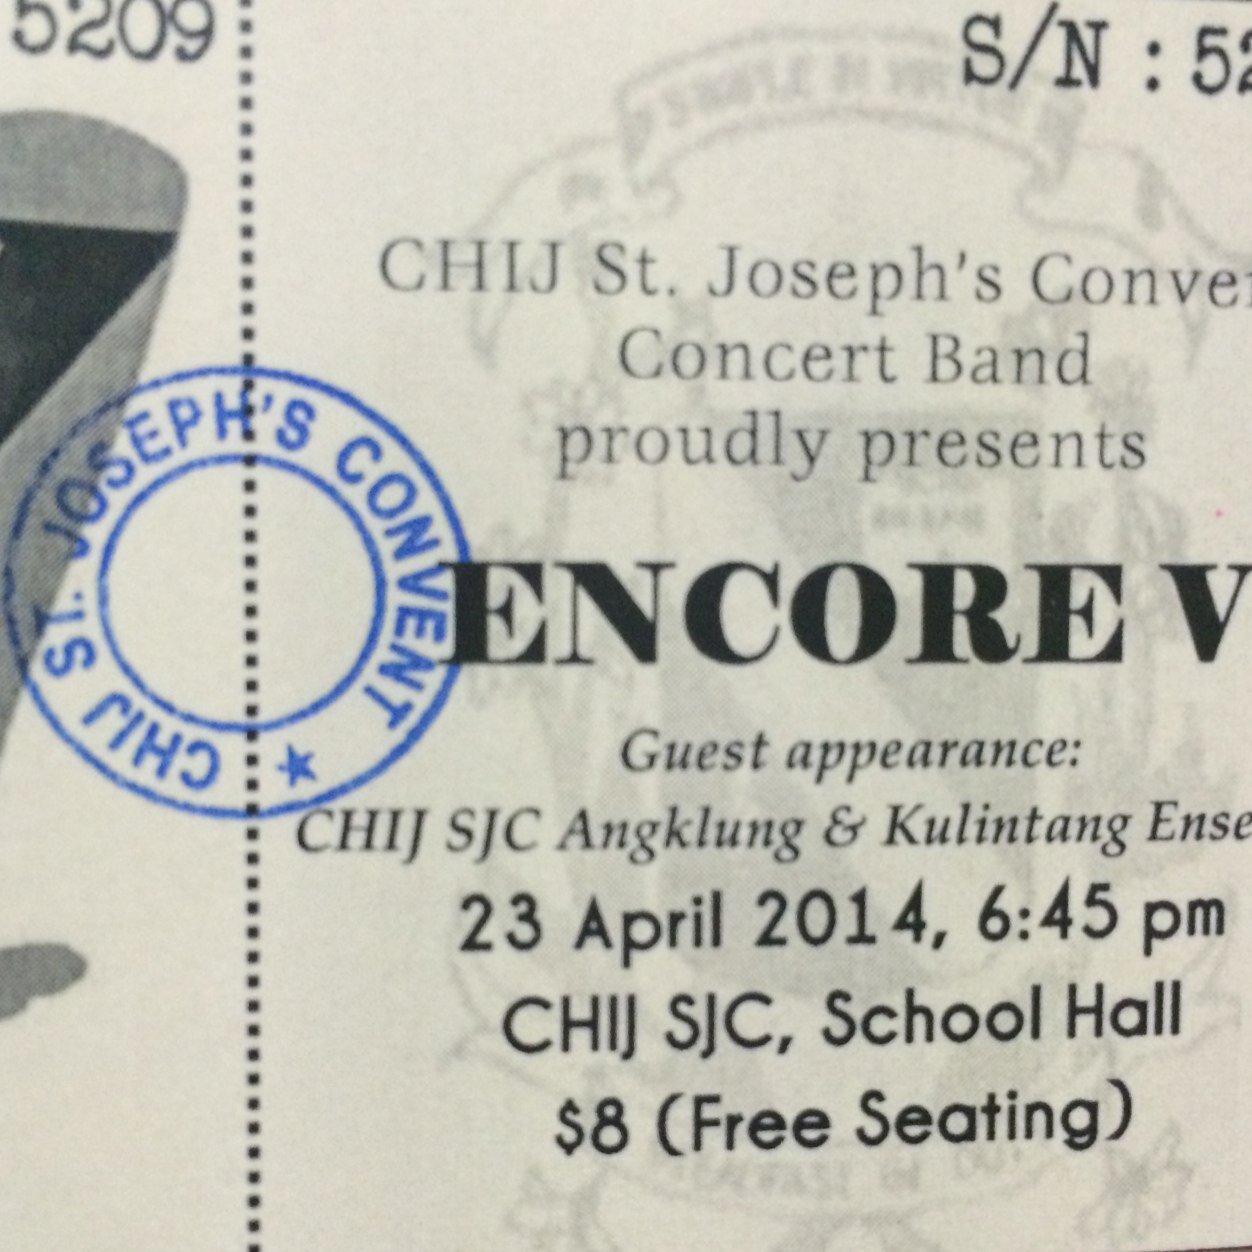 CHIJ St. Joseph's Convent Concert Band proudly presents Encore V ✨✨Guest appearance: CHIJ SJC Angklung & Kulintang Ensem 23 April '14, 6:45pm ($8, free seating)